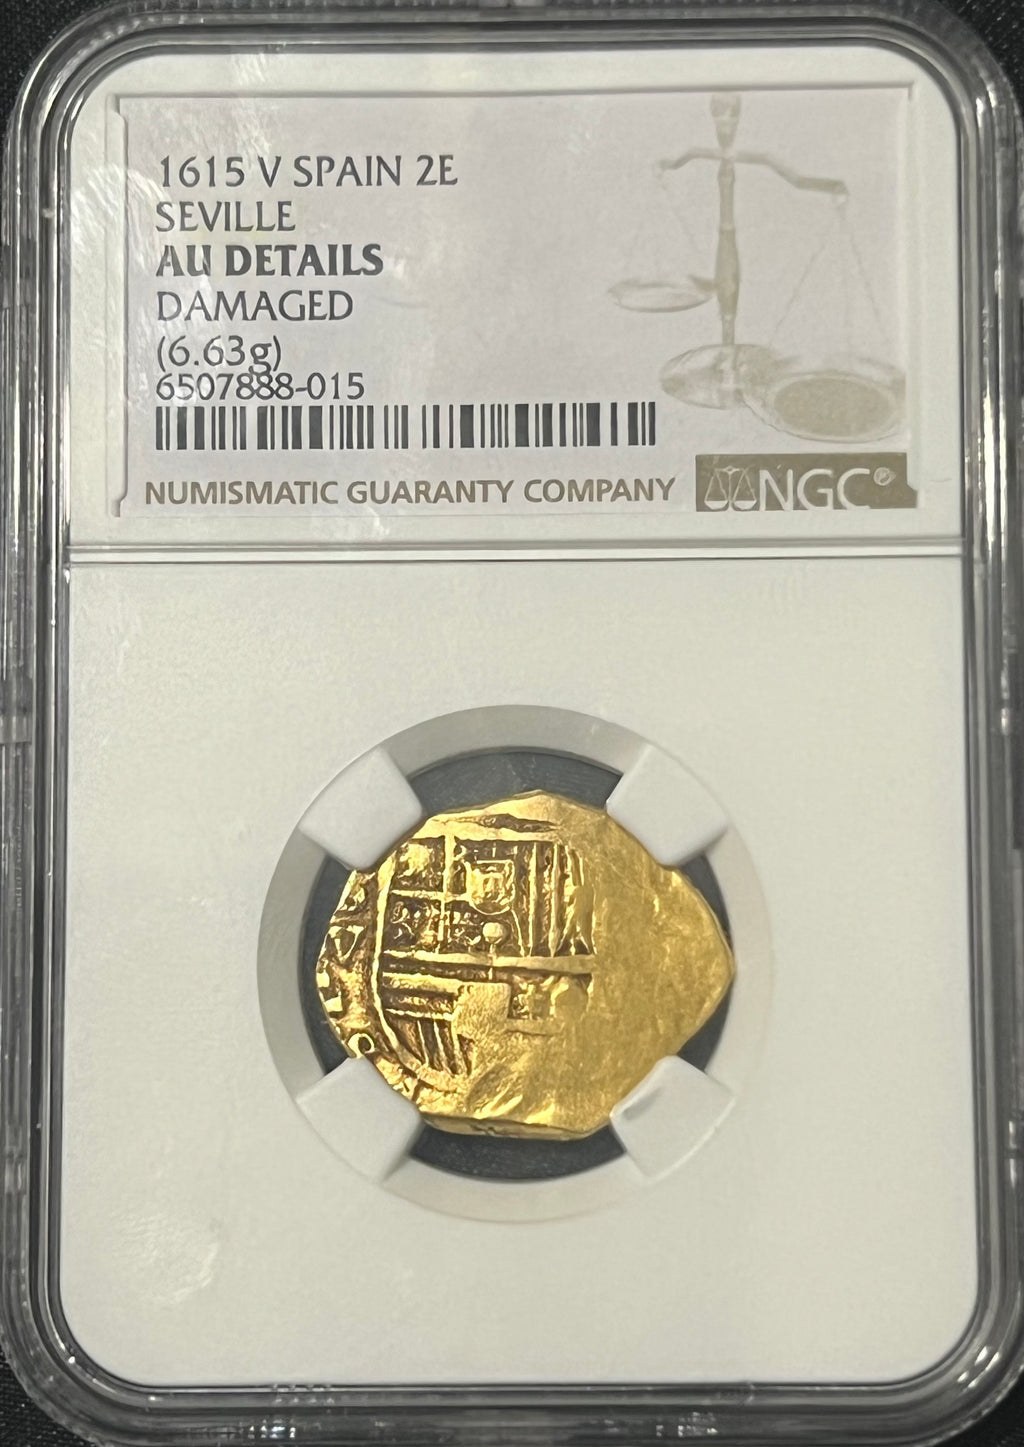 2 Escudos Seville, Spain Gold Coin NGC Grade AU Details Dated 1615